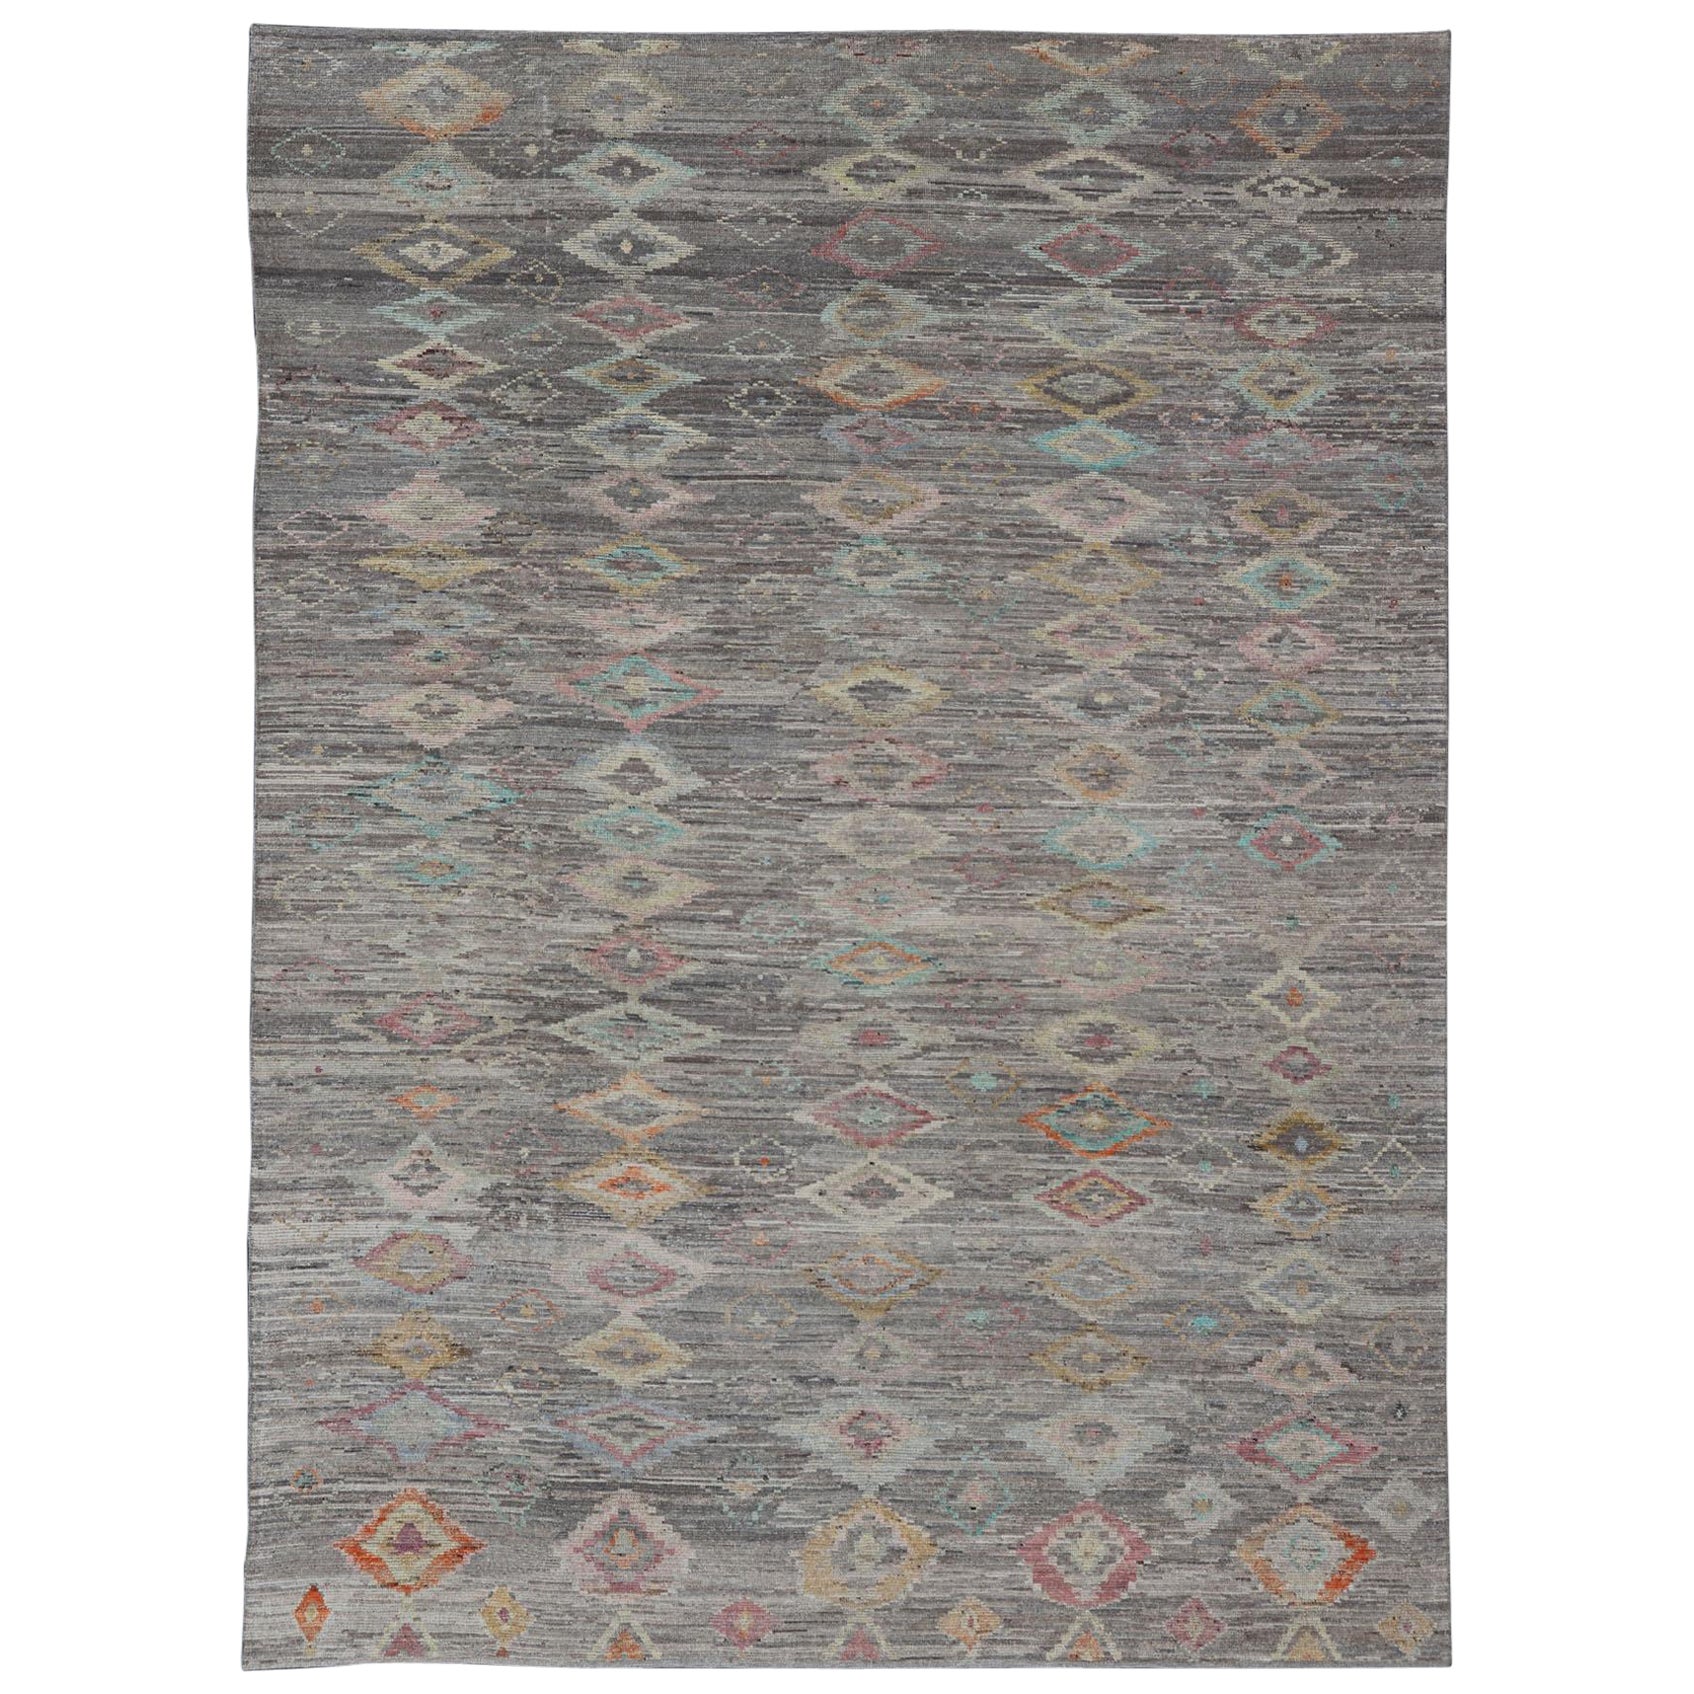 Casual Modern Design Rug in Light Grey and Pops of Colors for Modern Interiors